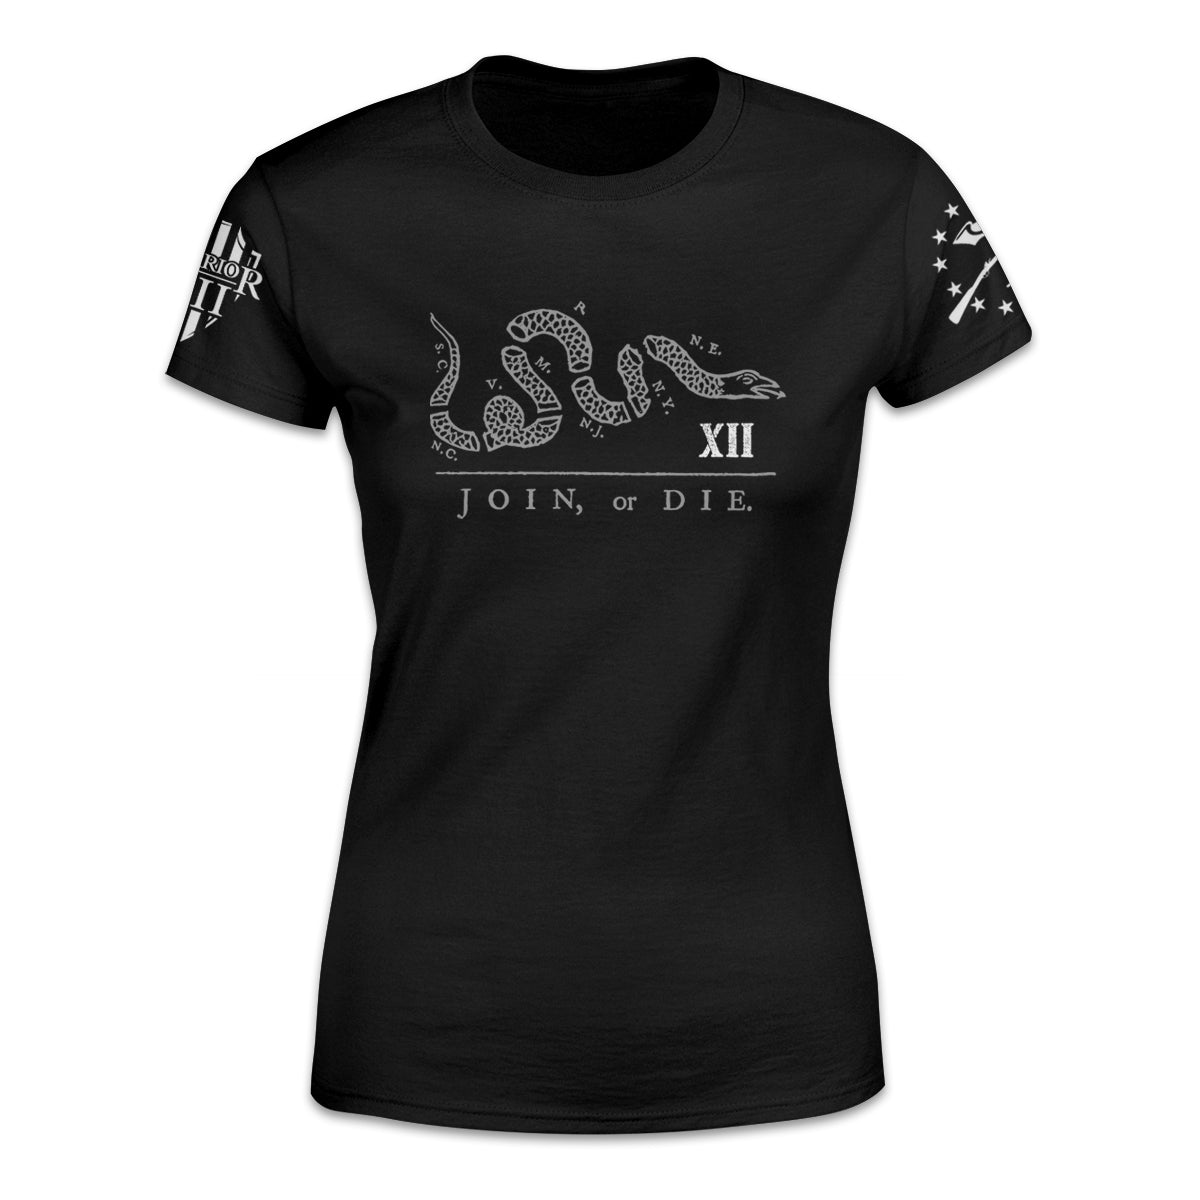 A women's black t-shirt with the words, "join or die" and a snake printed on the front of the shirt.